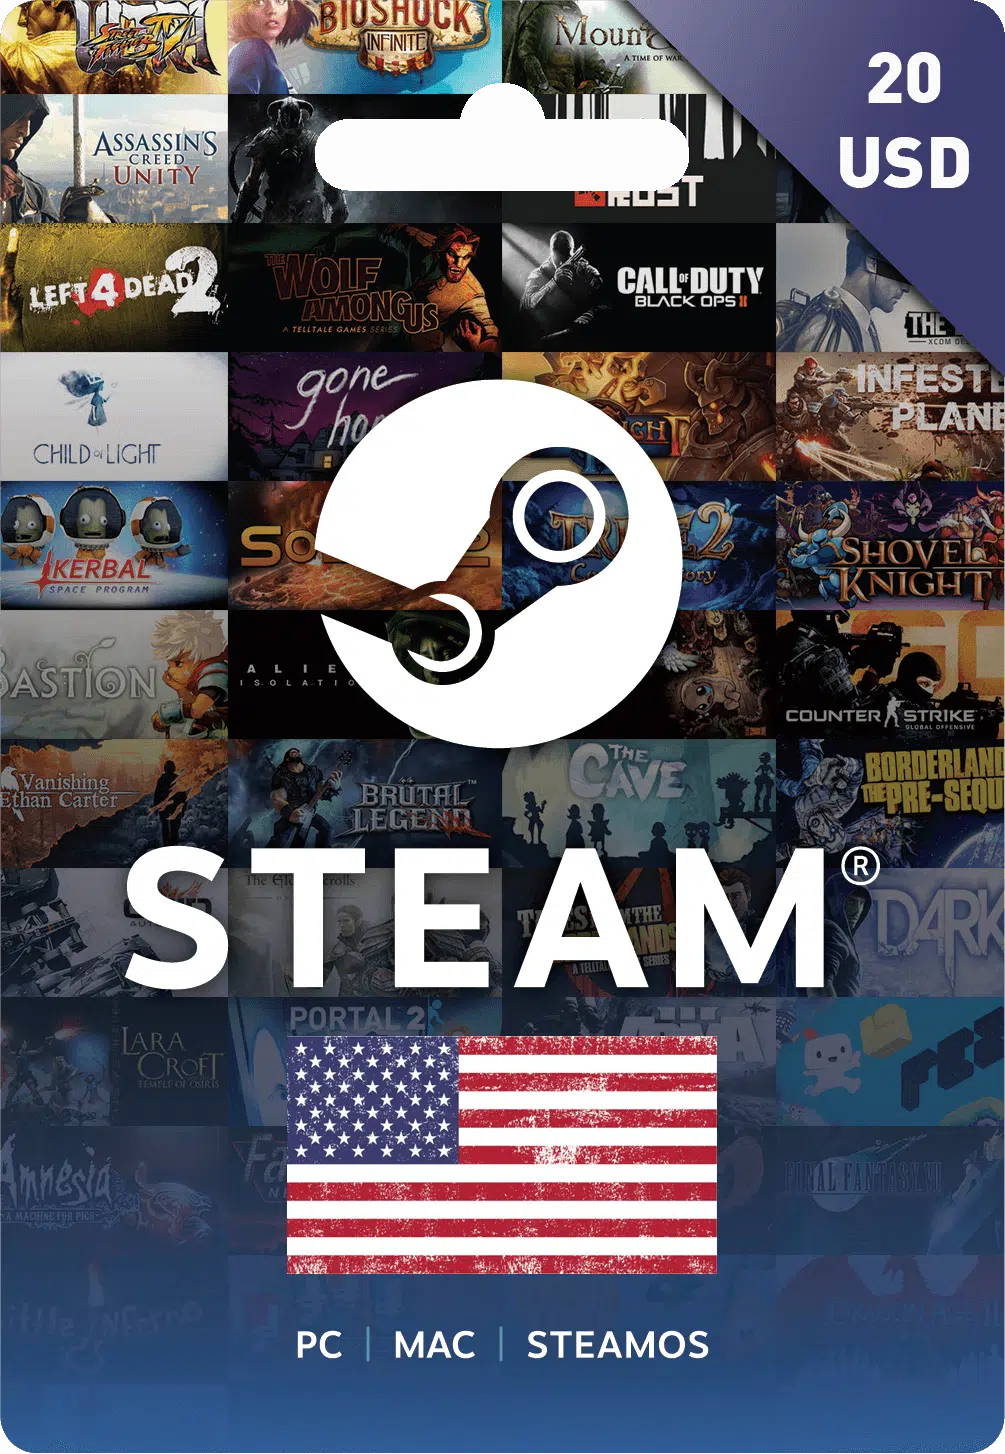 Buy Steam Wallet Codes 20 USD Now IaM A Live Store